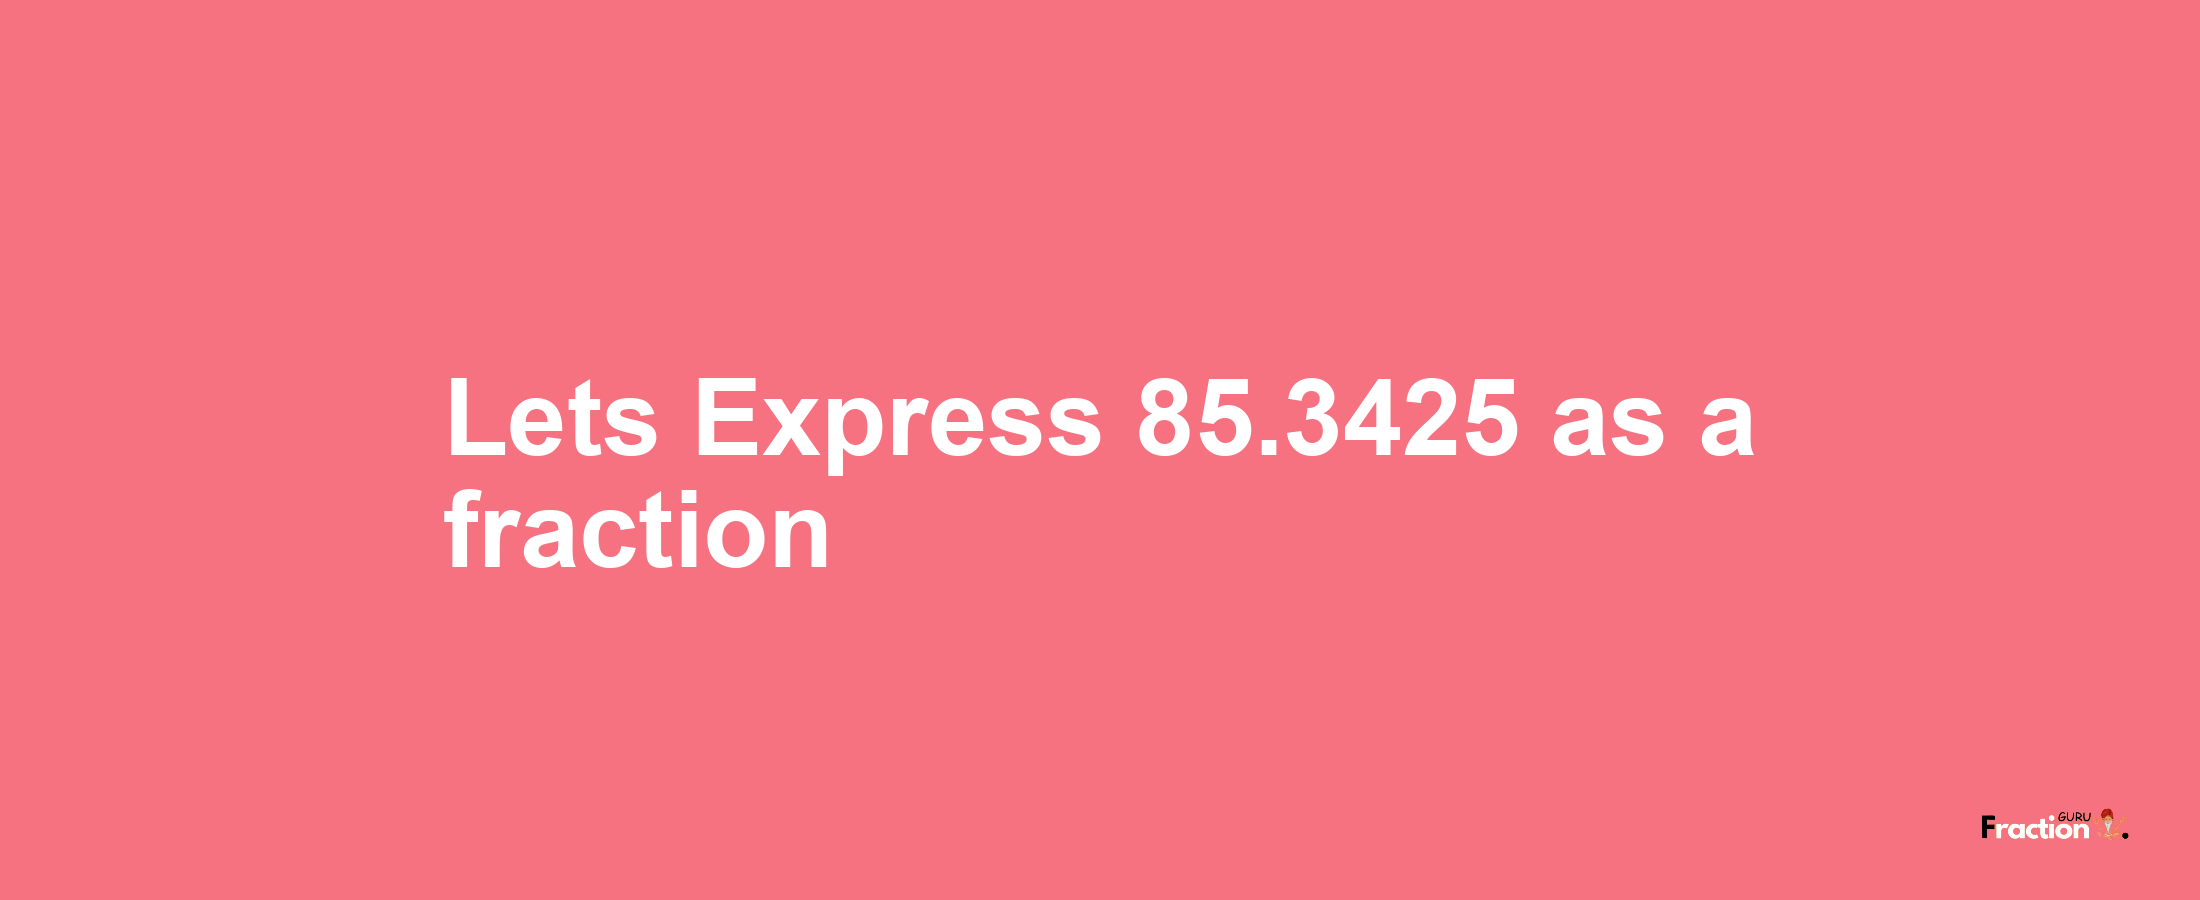 Lets Express 85.3425 as afraction